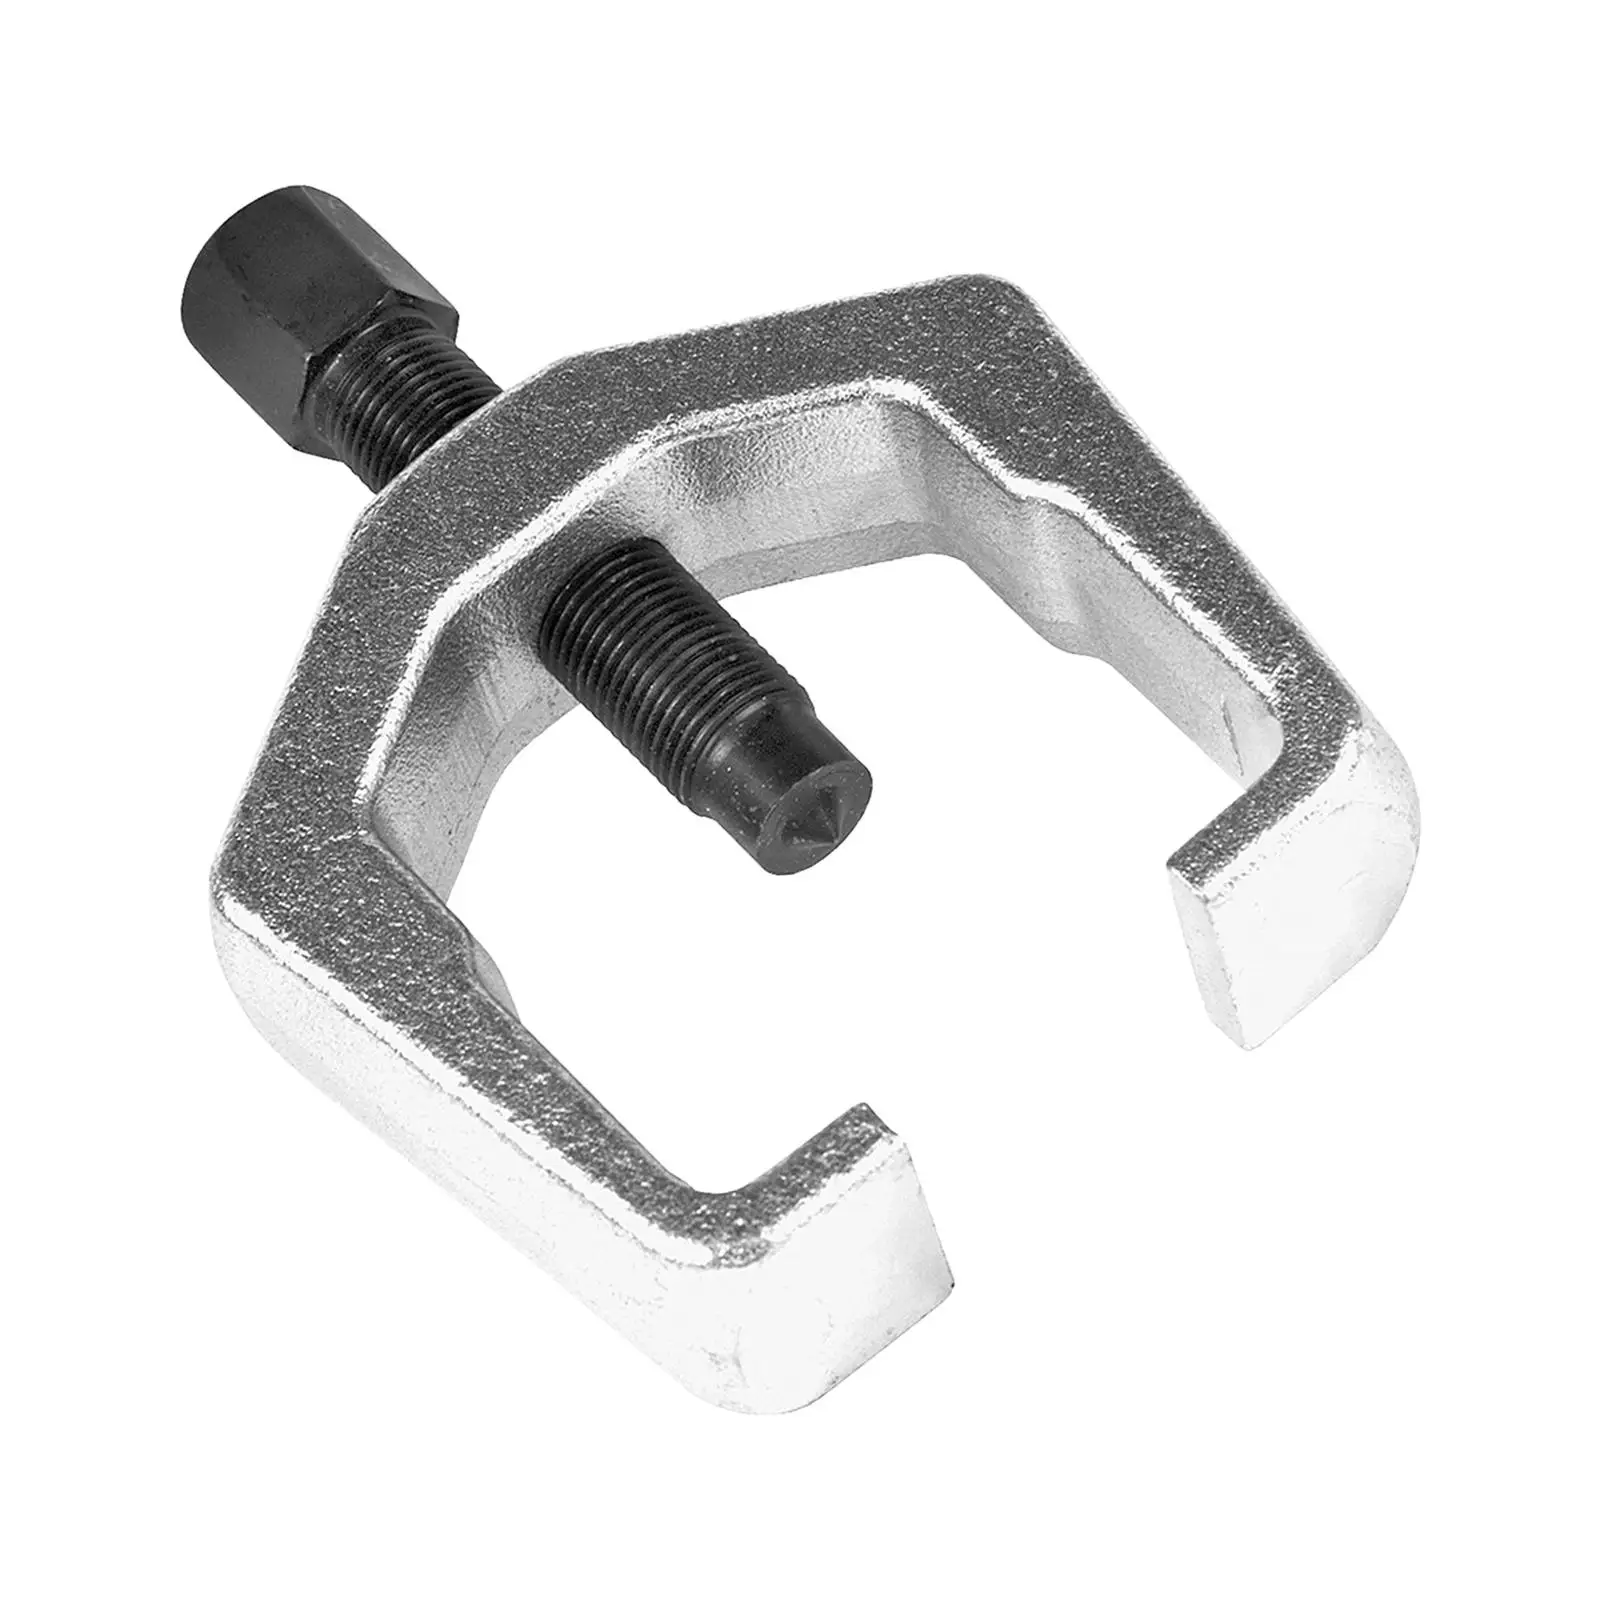 Slack Adjuster Puller Trailers 2 Jaw Gear Puller Durable Heavy Duty Compact Removal Tool for Gears Remover Tool Maintenance Tool